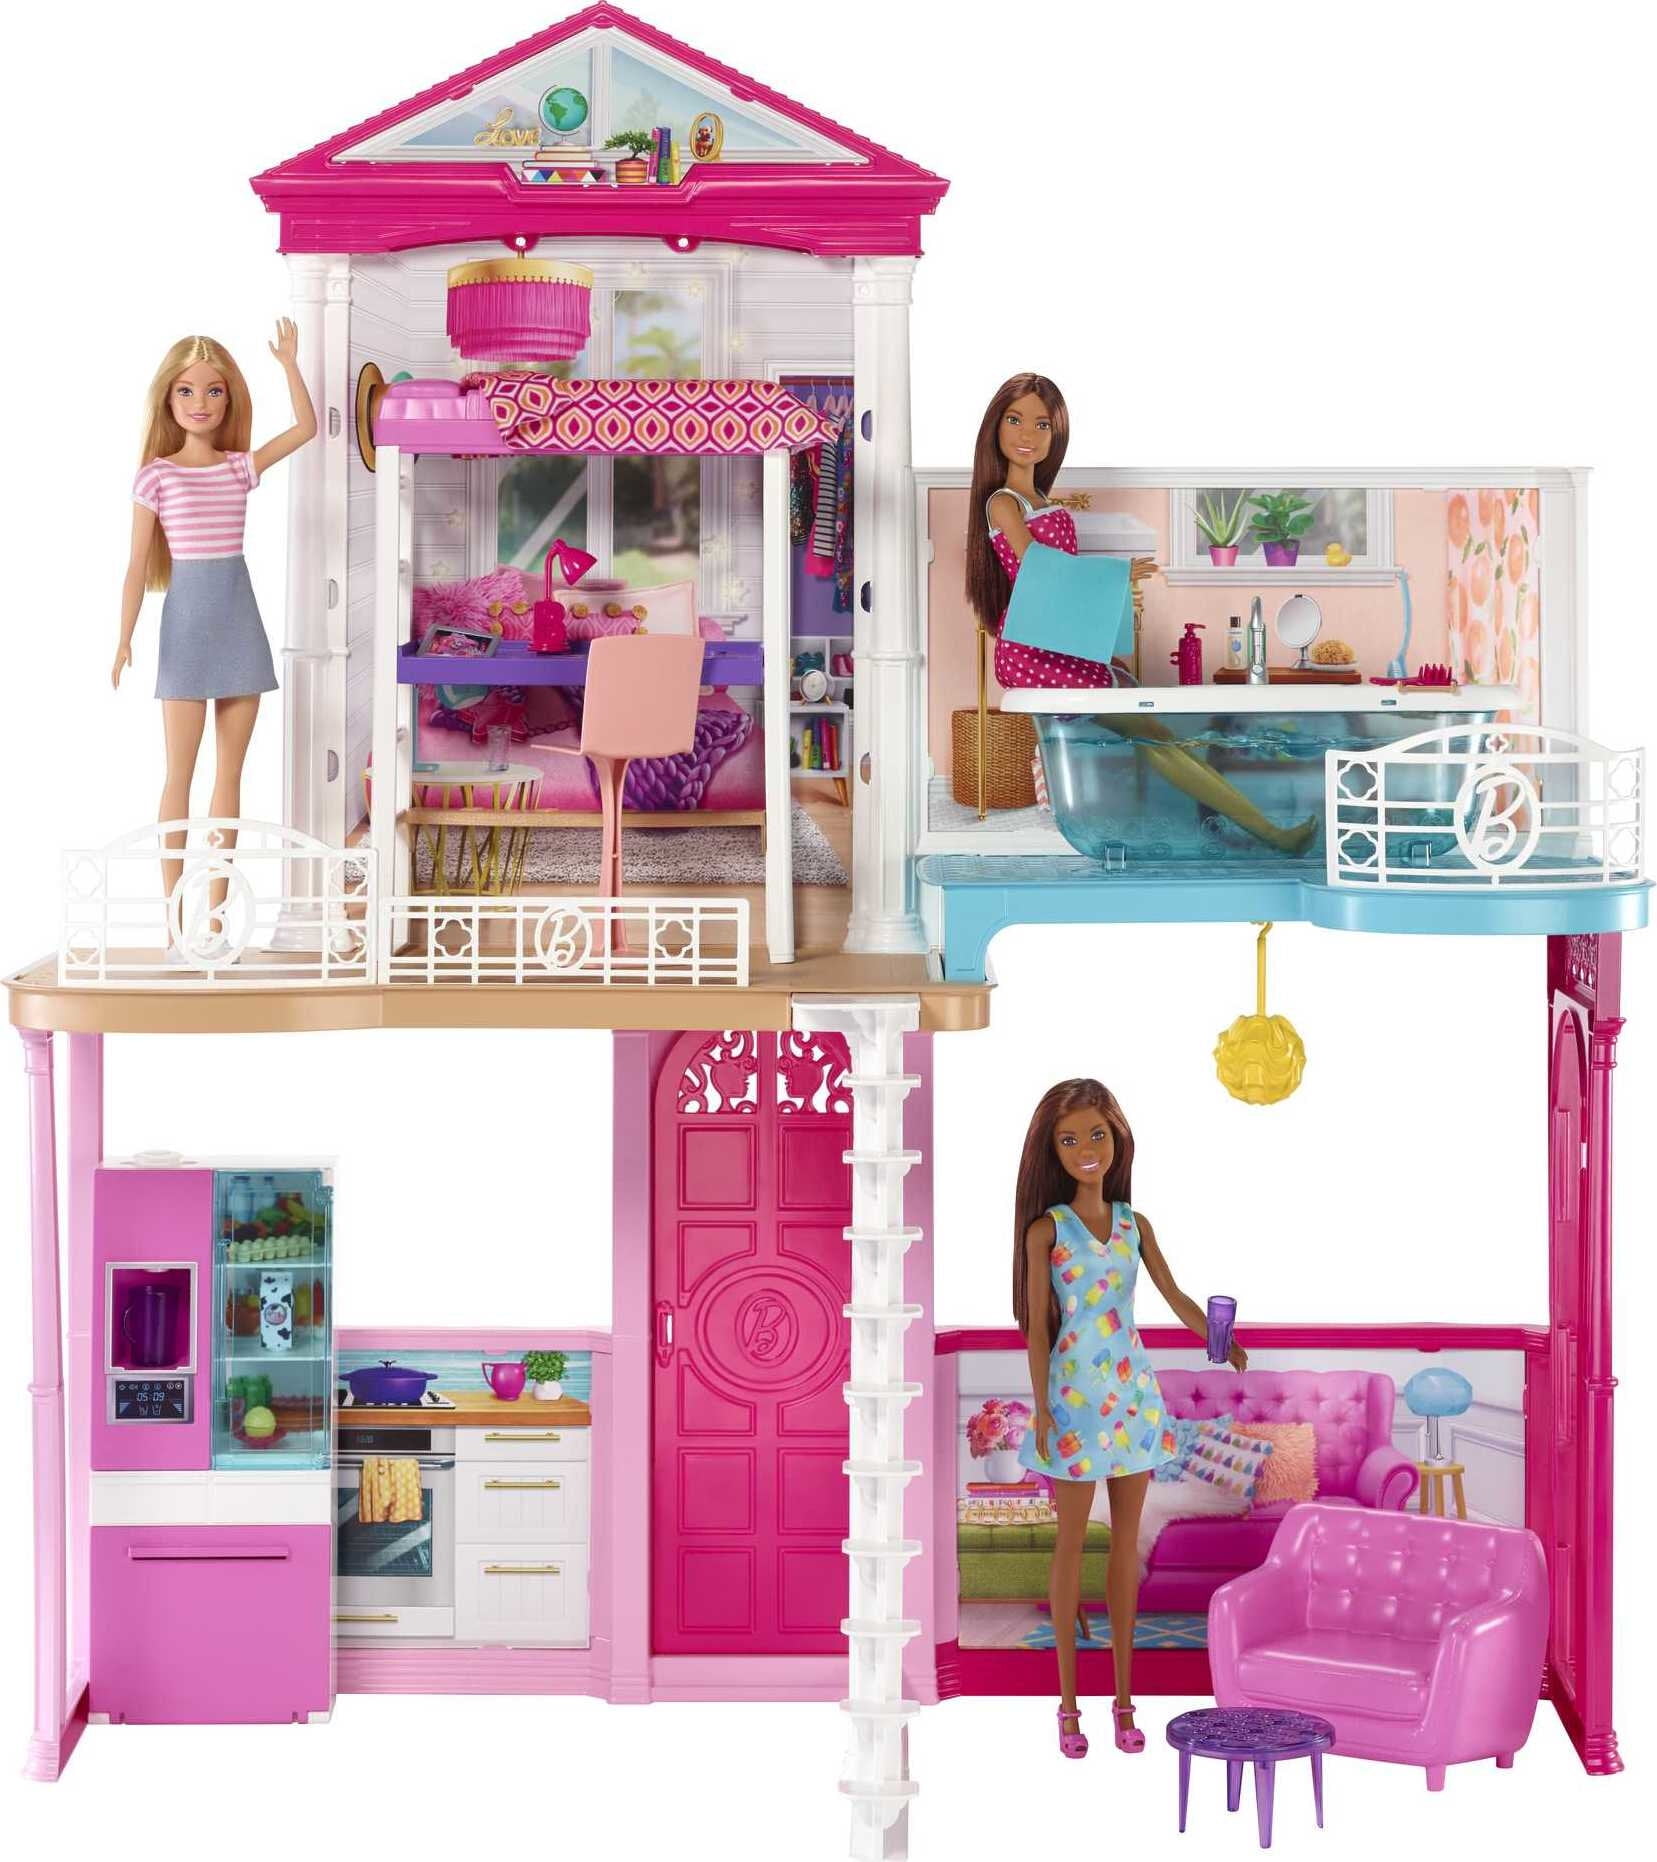 Barbie Dollhouse Set 3 Dolls and Furniture, Pool and Accessories -